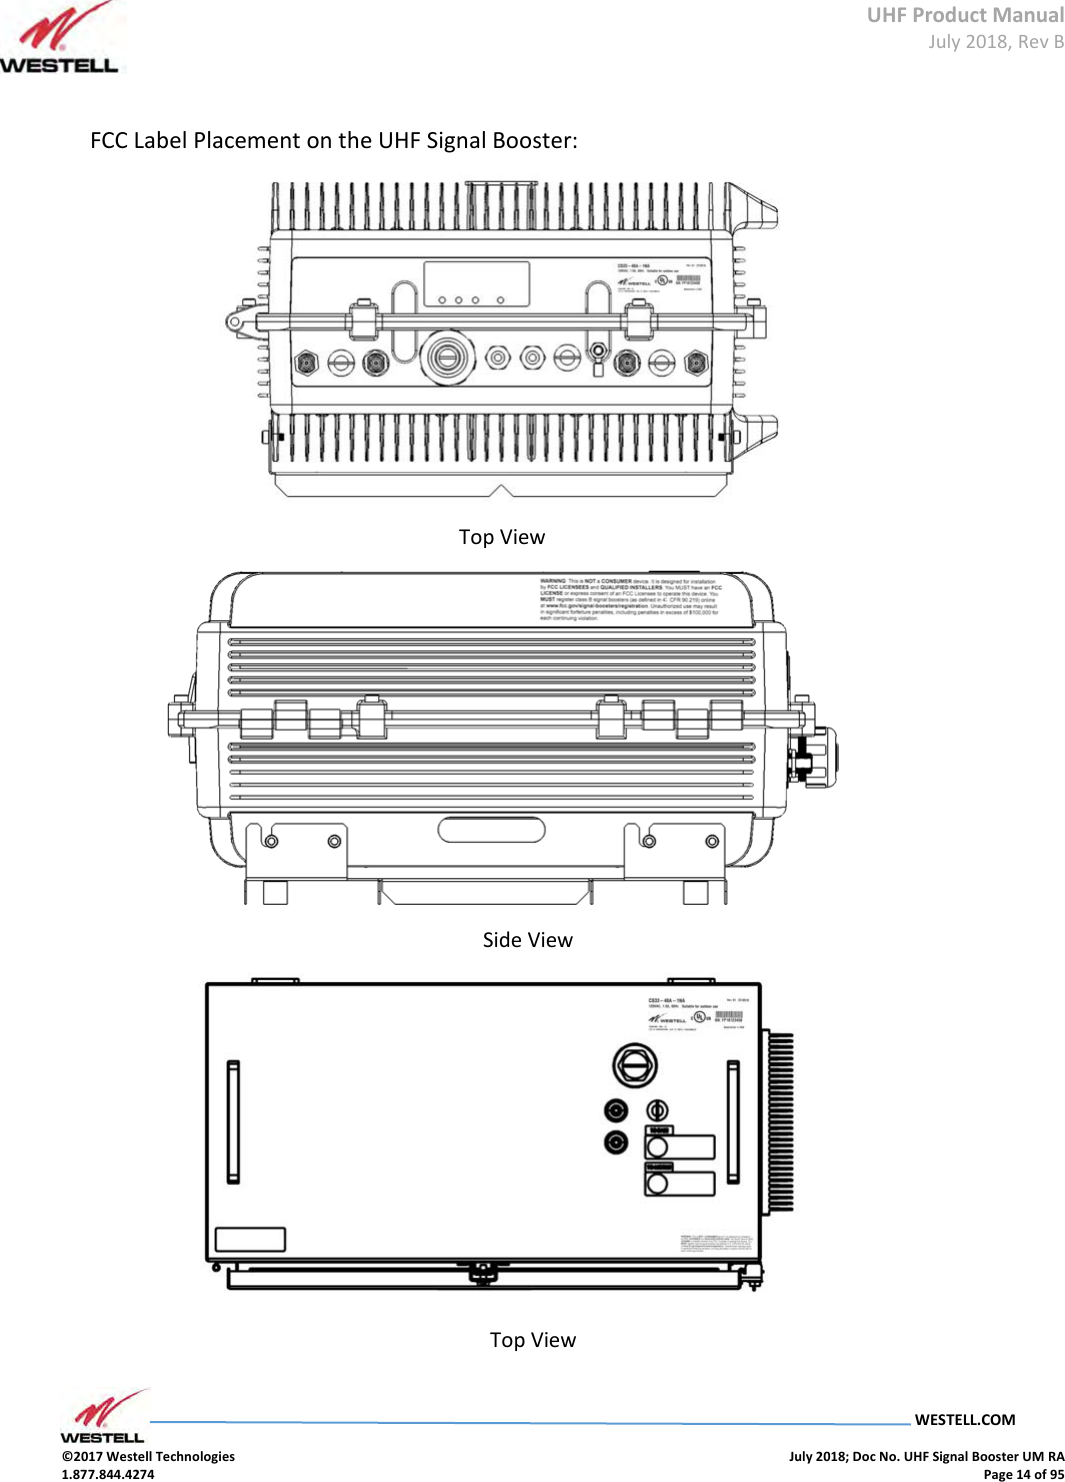 UHF Product Manual July 2018, Rev B   WESTELL.COM  ©2017 Westell Technologies    July 2018; Doc No. UHF Signal Booster UM RA 1.877.844.4274    Page 14 of 95   FCC Label Placement on the UHF Signal Booster:  Top View            Side View              Top View  